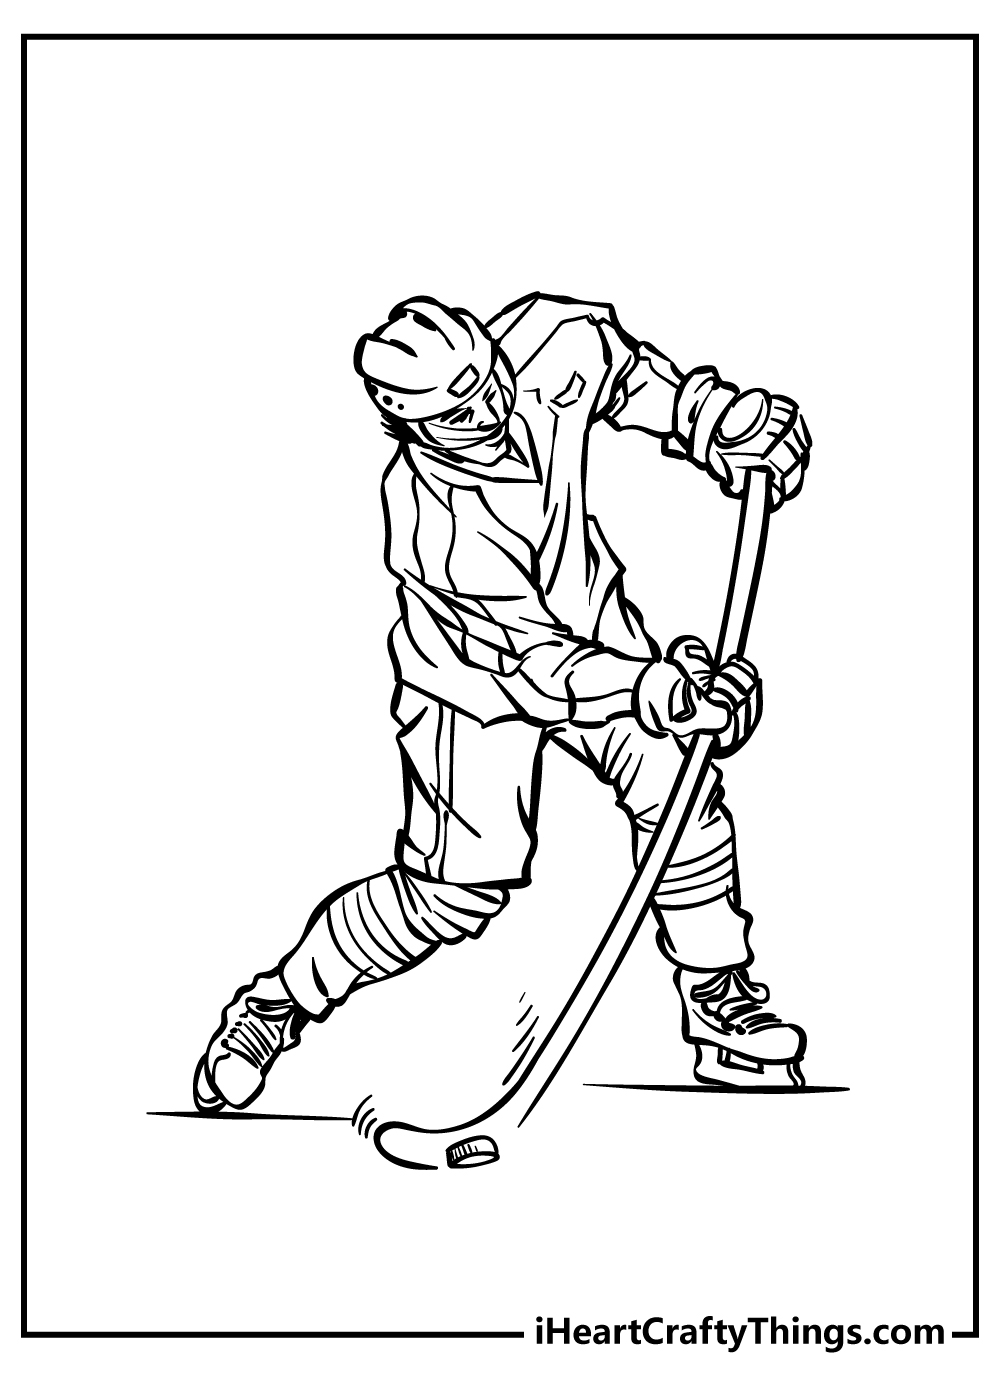 Hockey Coloring Pages for adults free printable